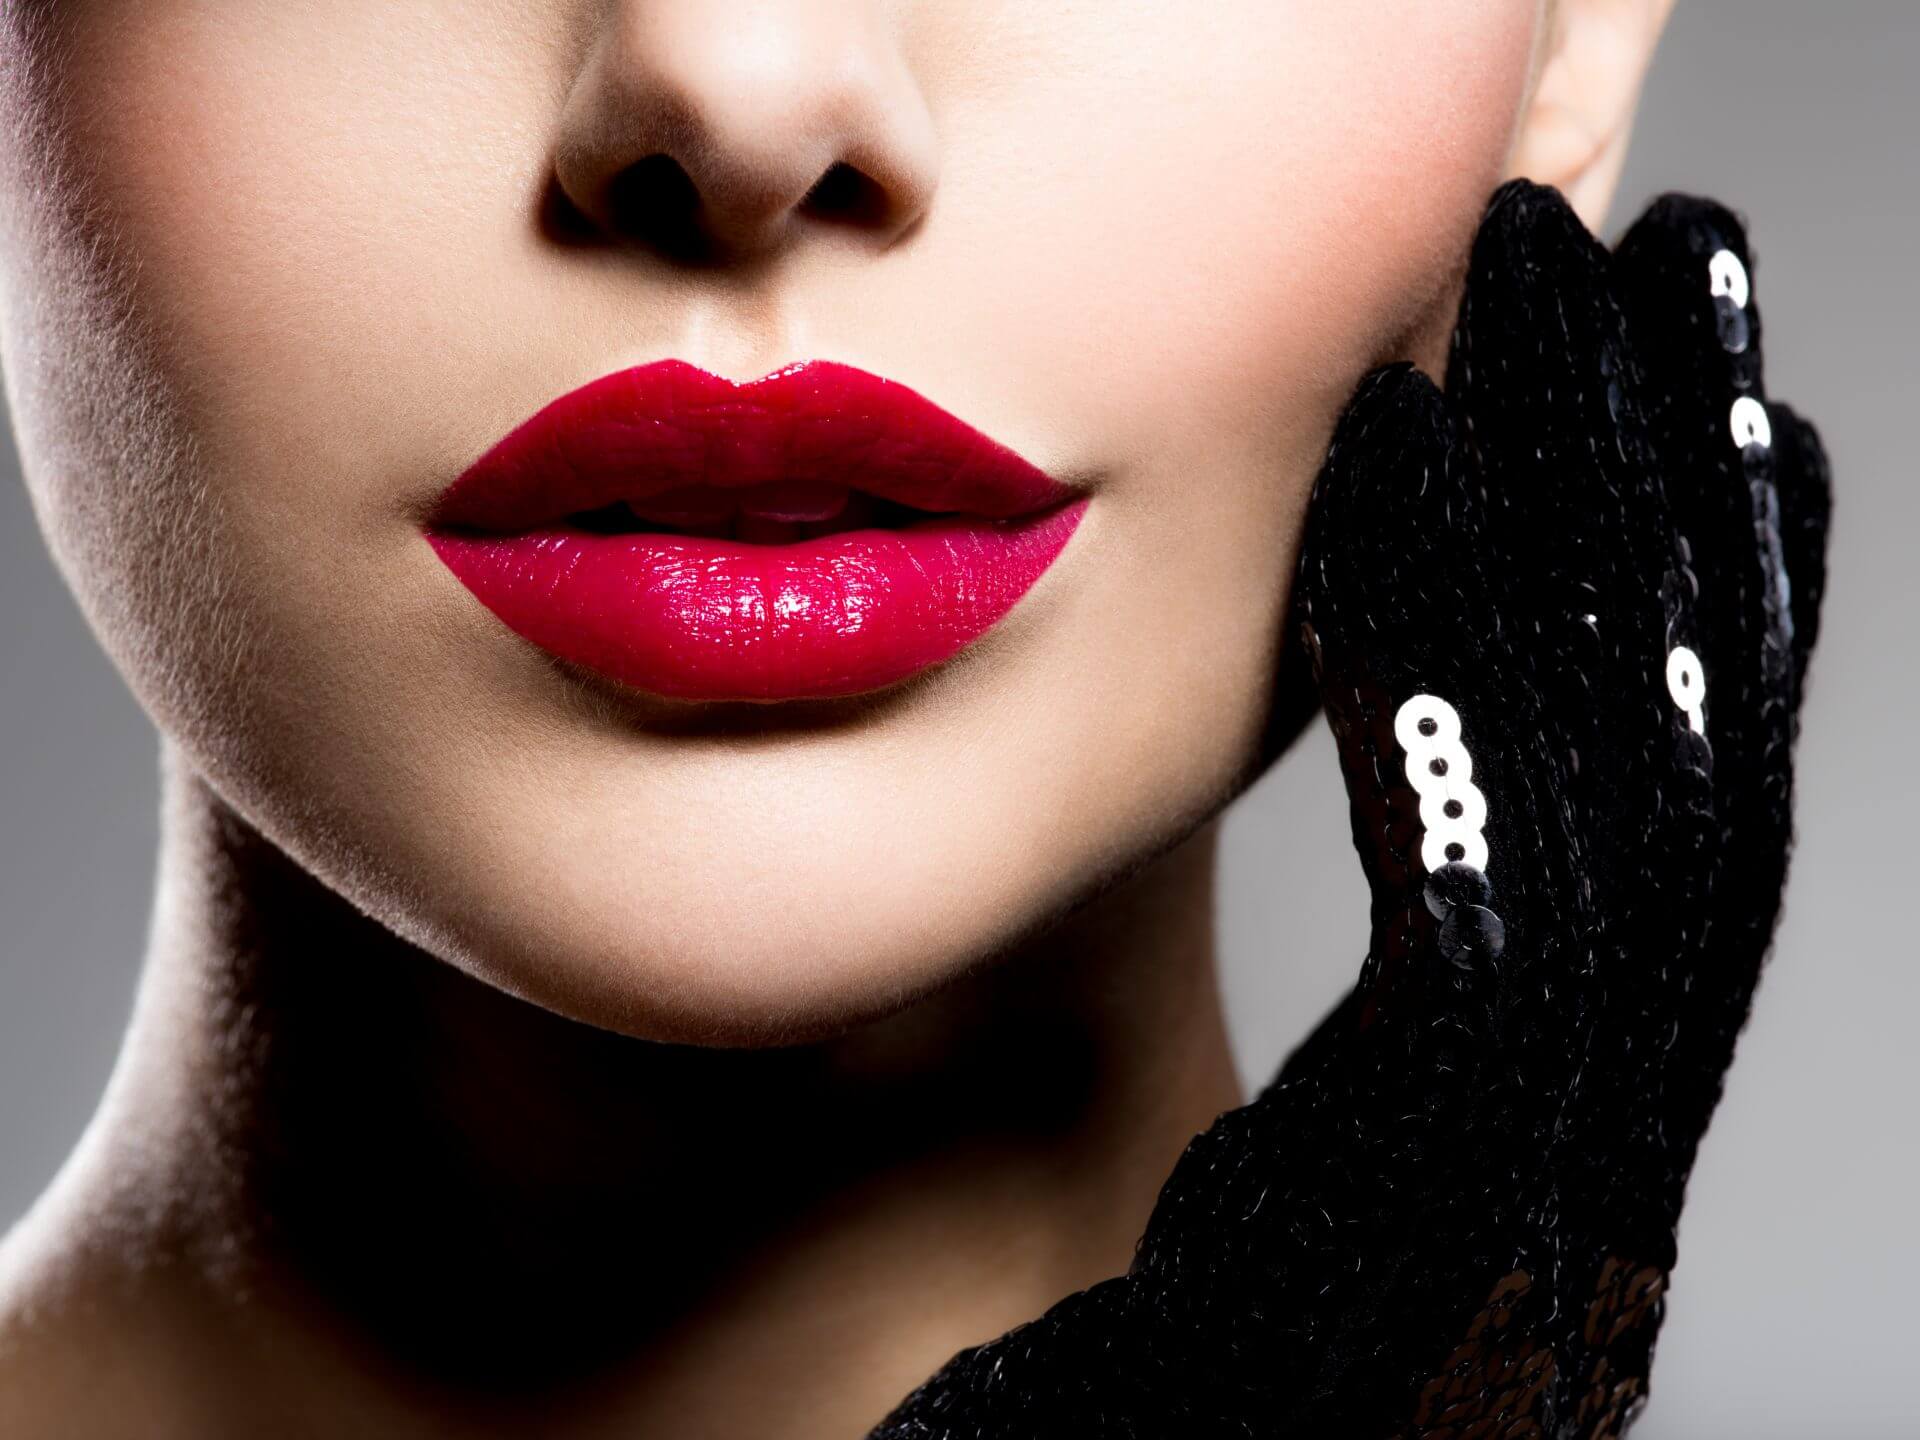 lose up women s lips with red lipstick black gloves cheek